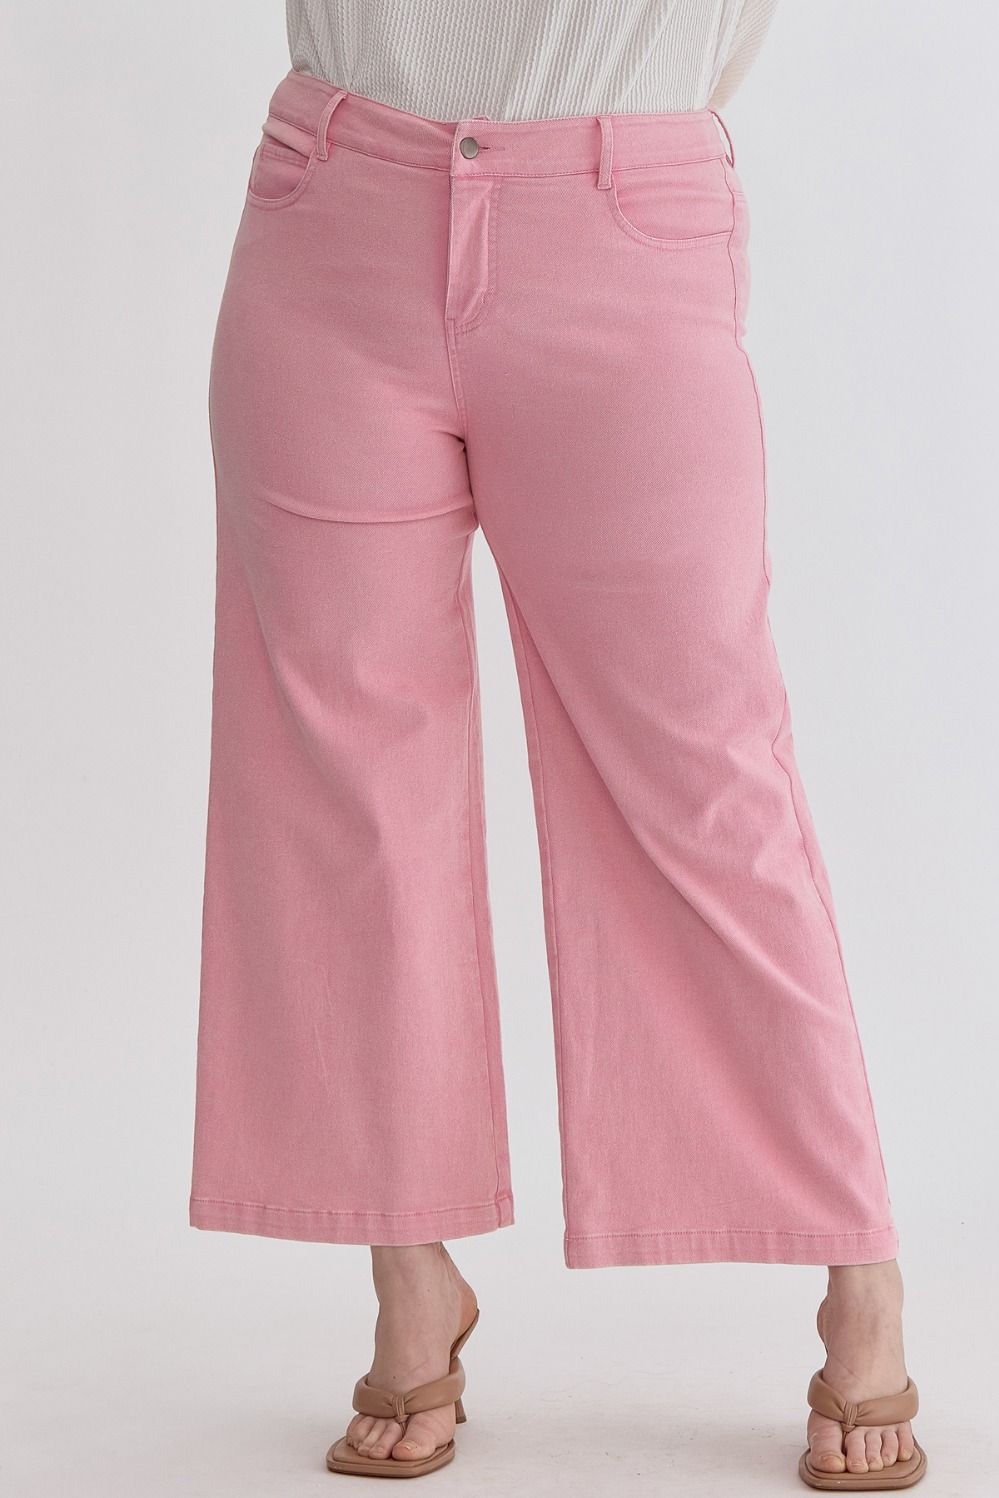 Curvy Cotton Candy Jeans